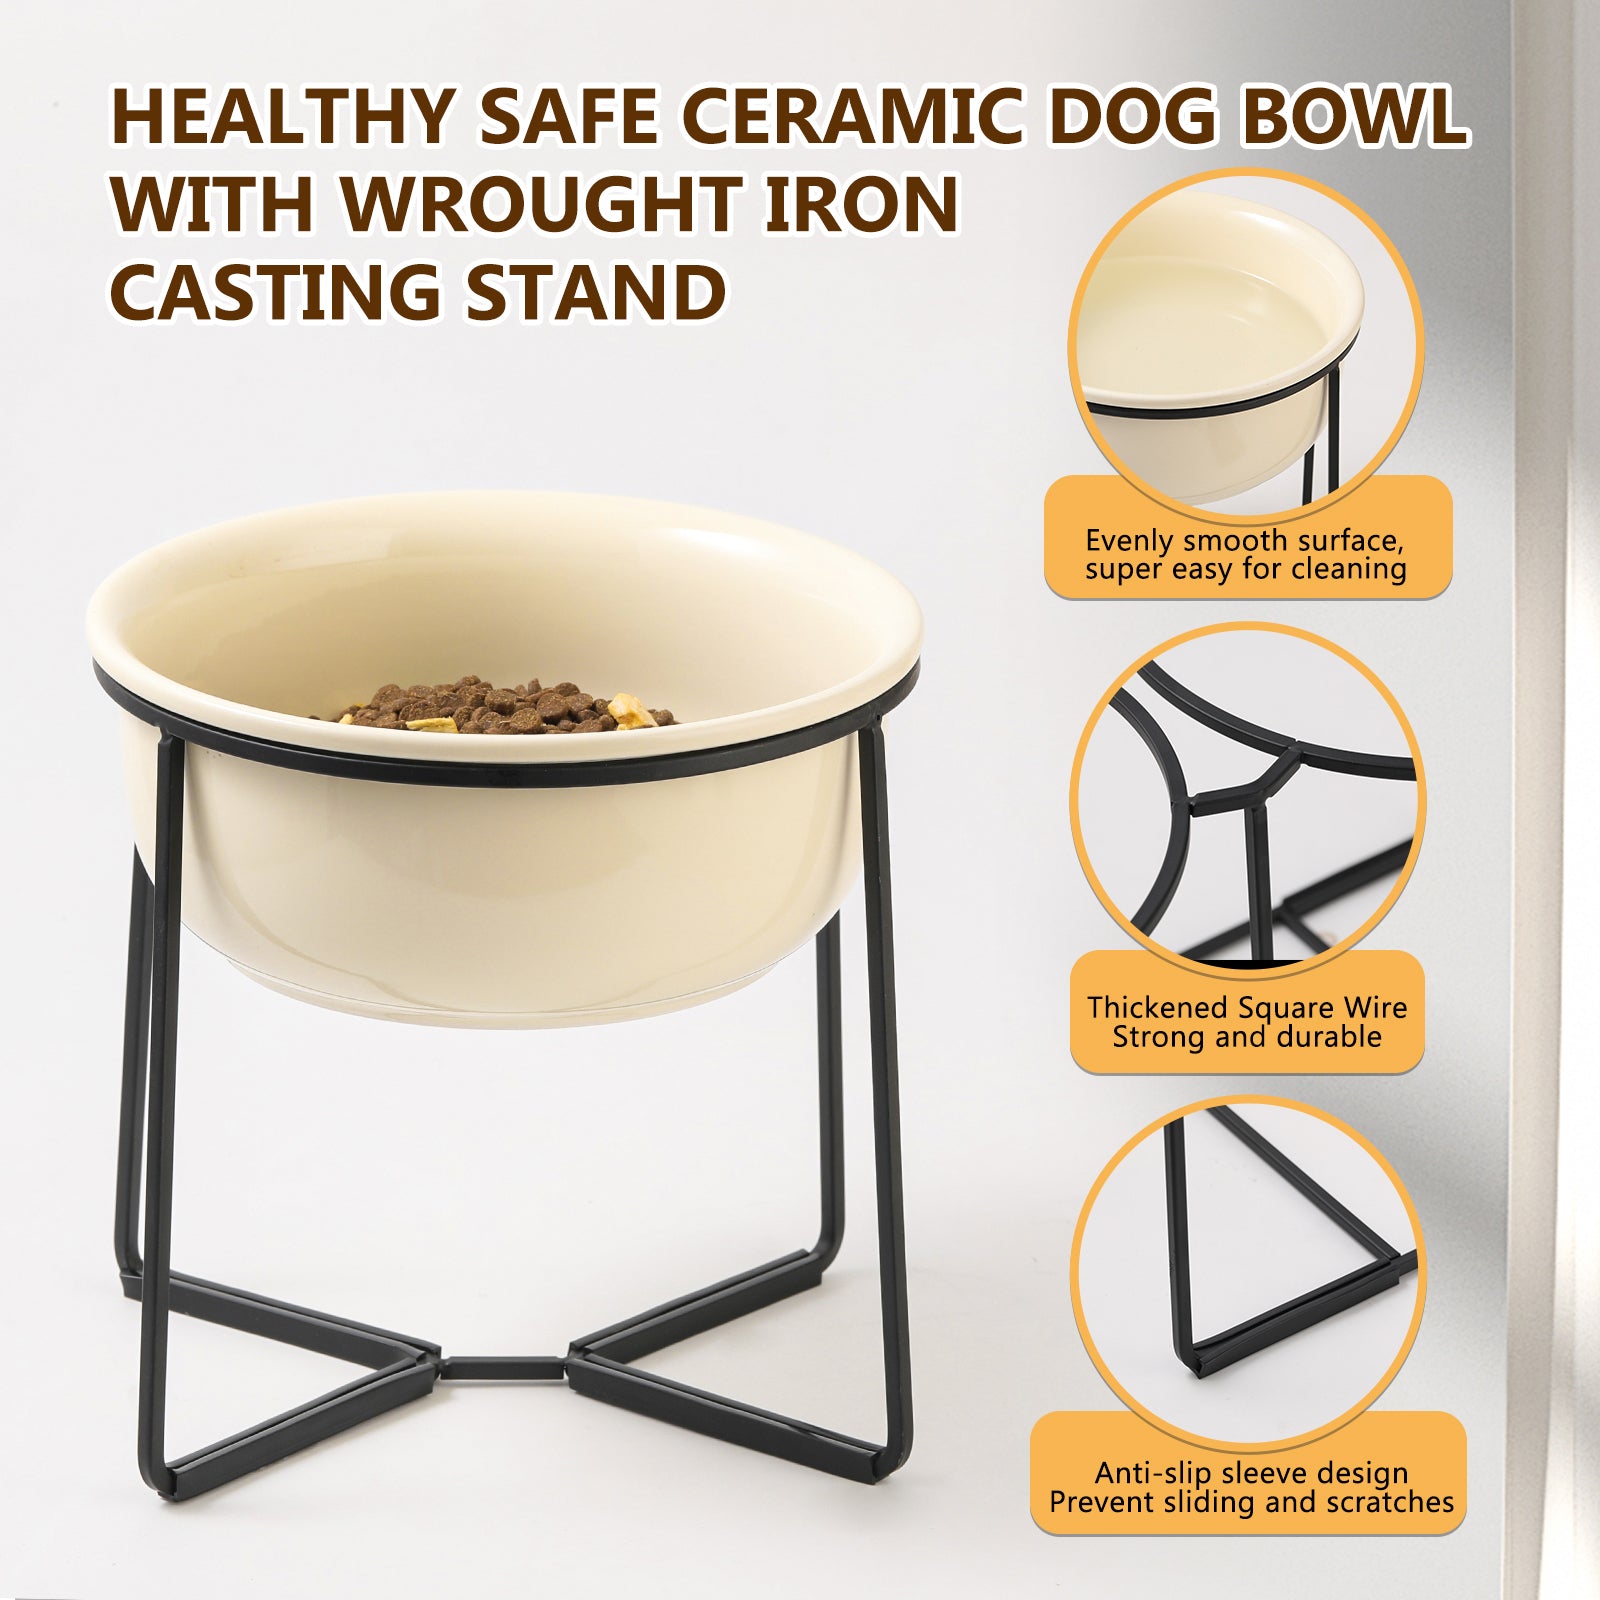 Elevated Large Dog Bowl Set - Raised Dog Food and Water Bowl with Non Slip Stand - Heavy Weighted Double Ceramic Dog Feeding Bowls - Extra Wide Deep Pet Dishes for Medium to Big Dogs